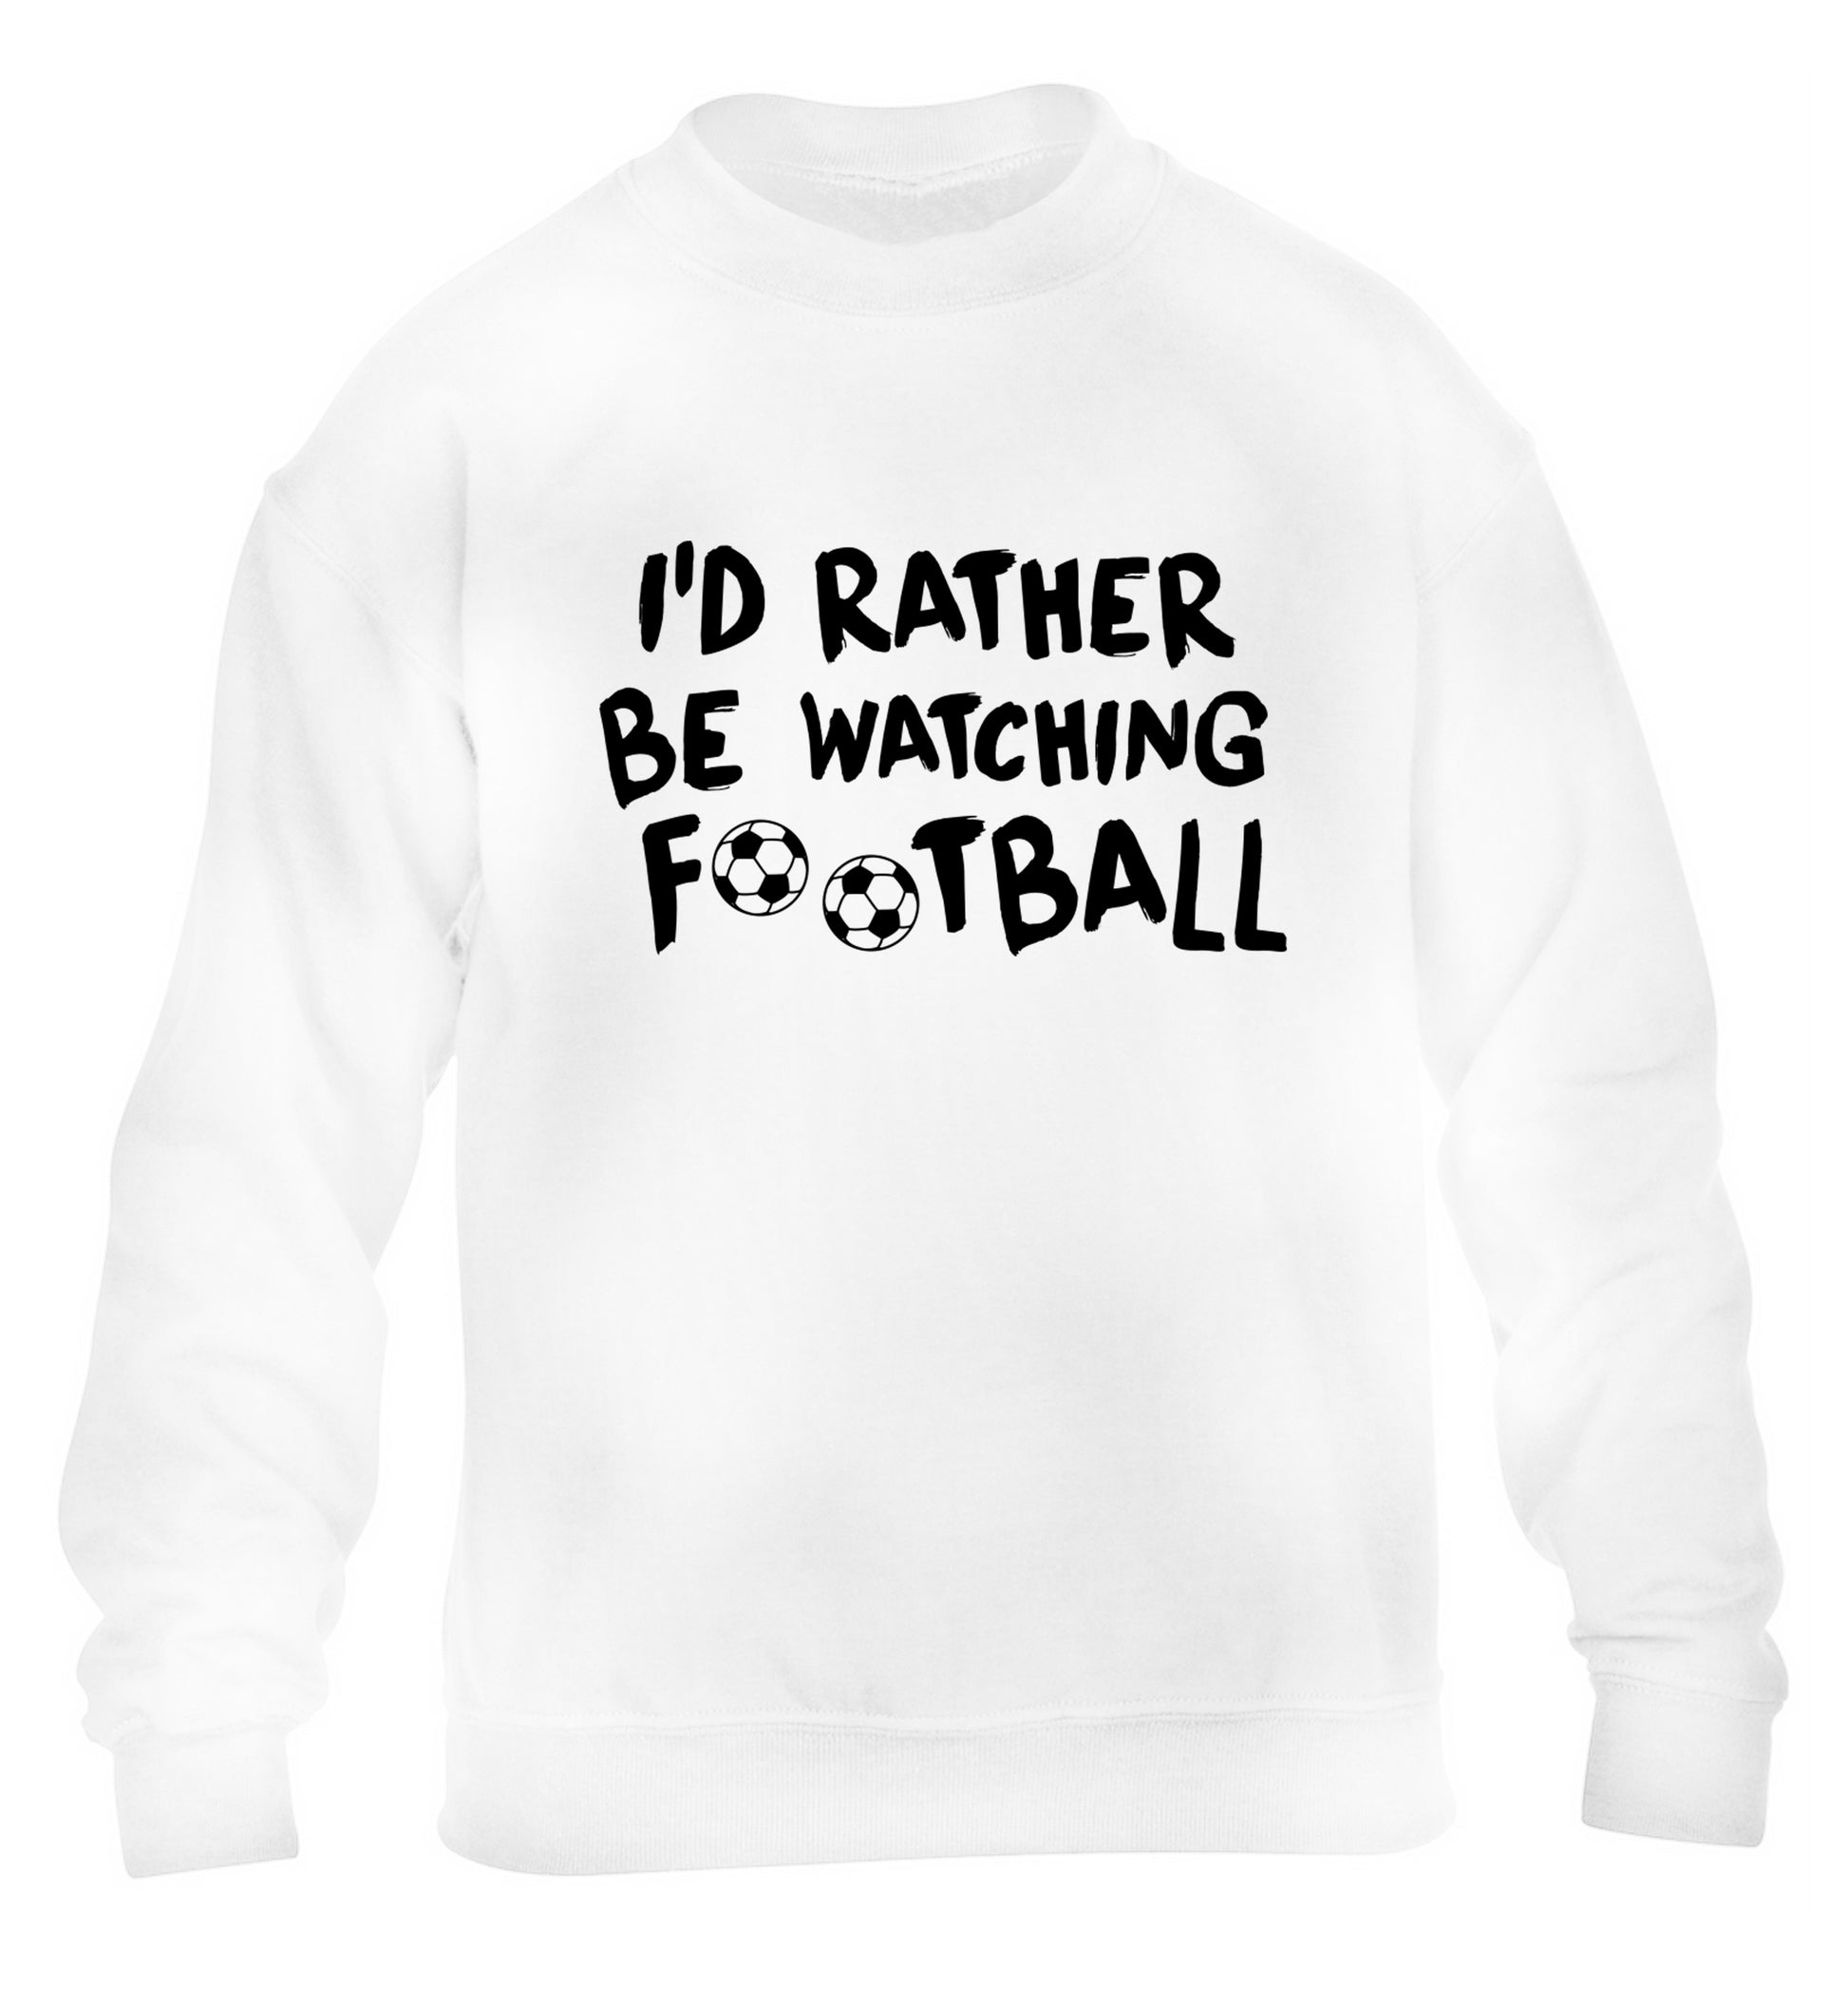 I'd rather be watching football children's white sweater 12-14 Years